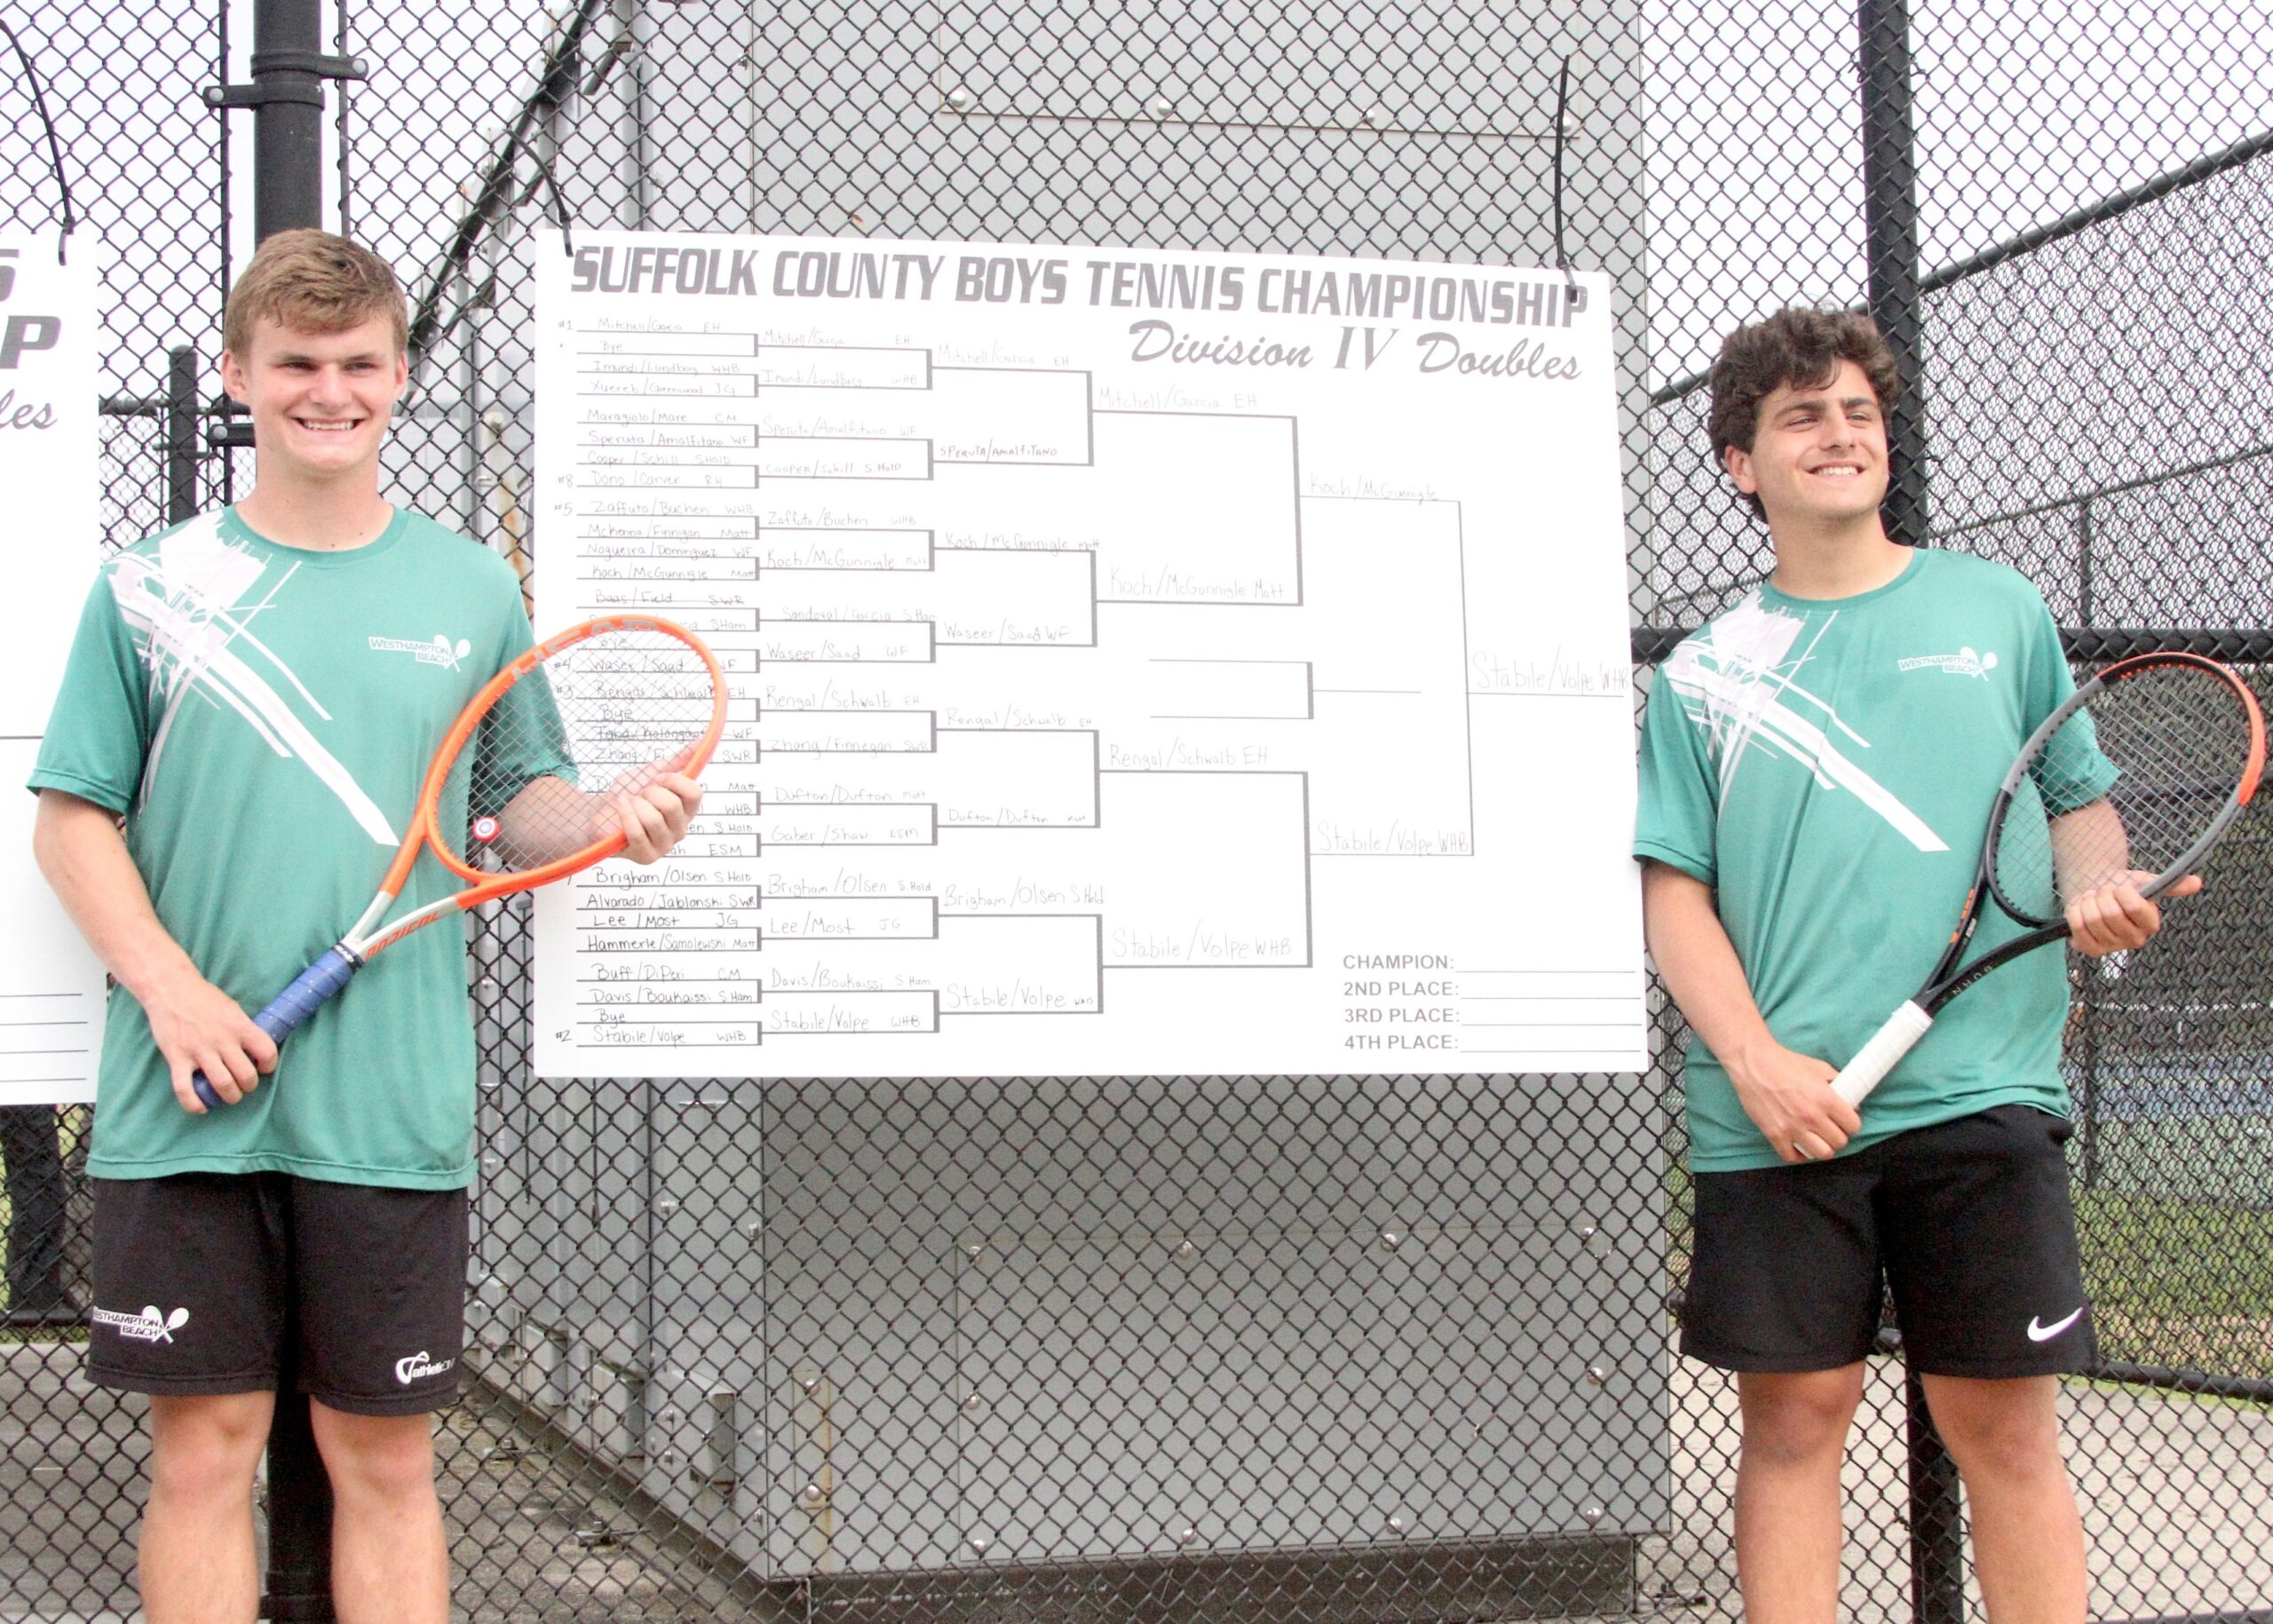 Westhampton Beach junior Bobby Stabile and senior Sandro Volpe placed first in the Division IV doubles tournament. DESIRÉE KEEGAN